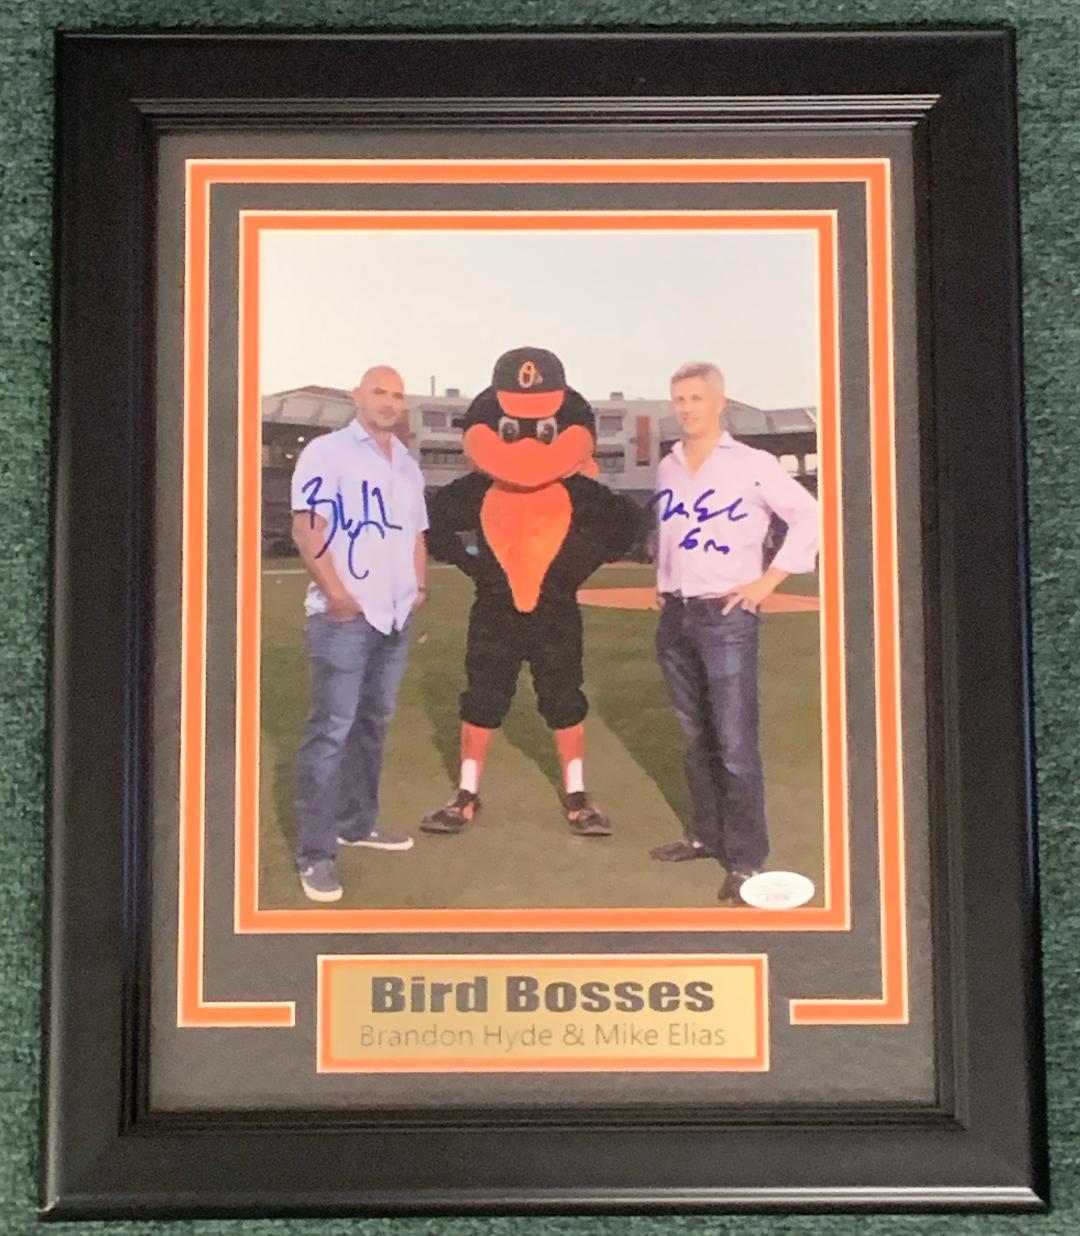 Bird Bosses signed 8x10 of Mike Elias and Brandon Hyde